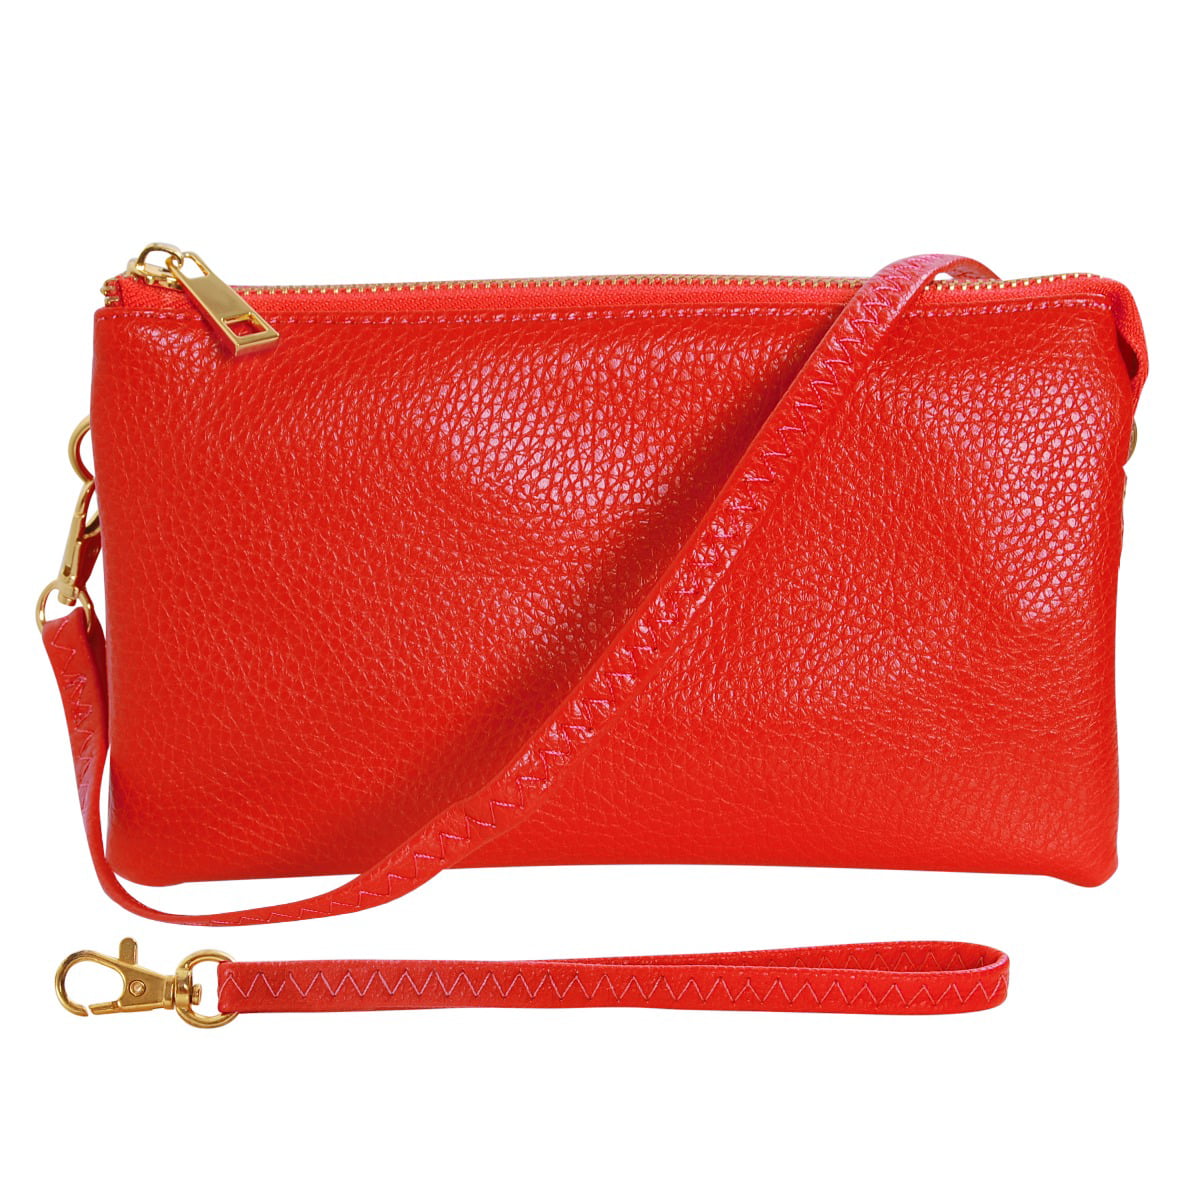 Humble Chic Vegan Leather Crossbody Wristlet Bag or Small Purse Clutch ...